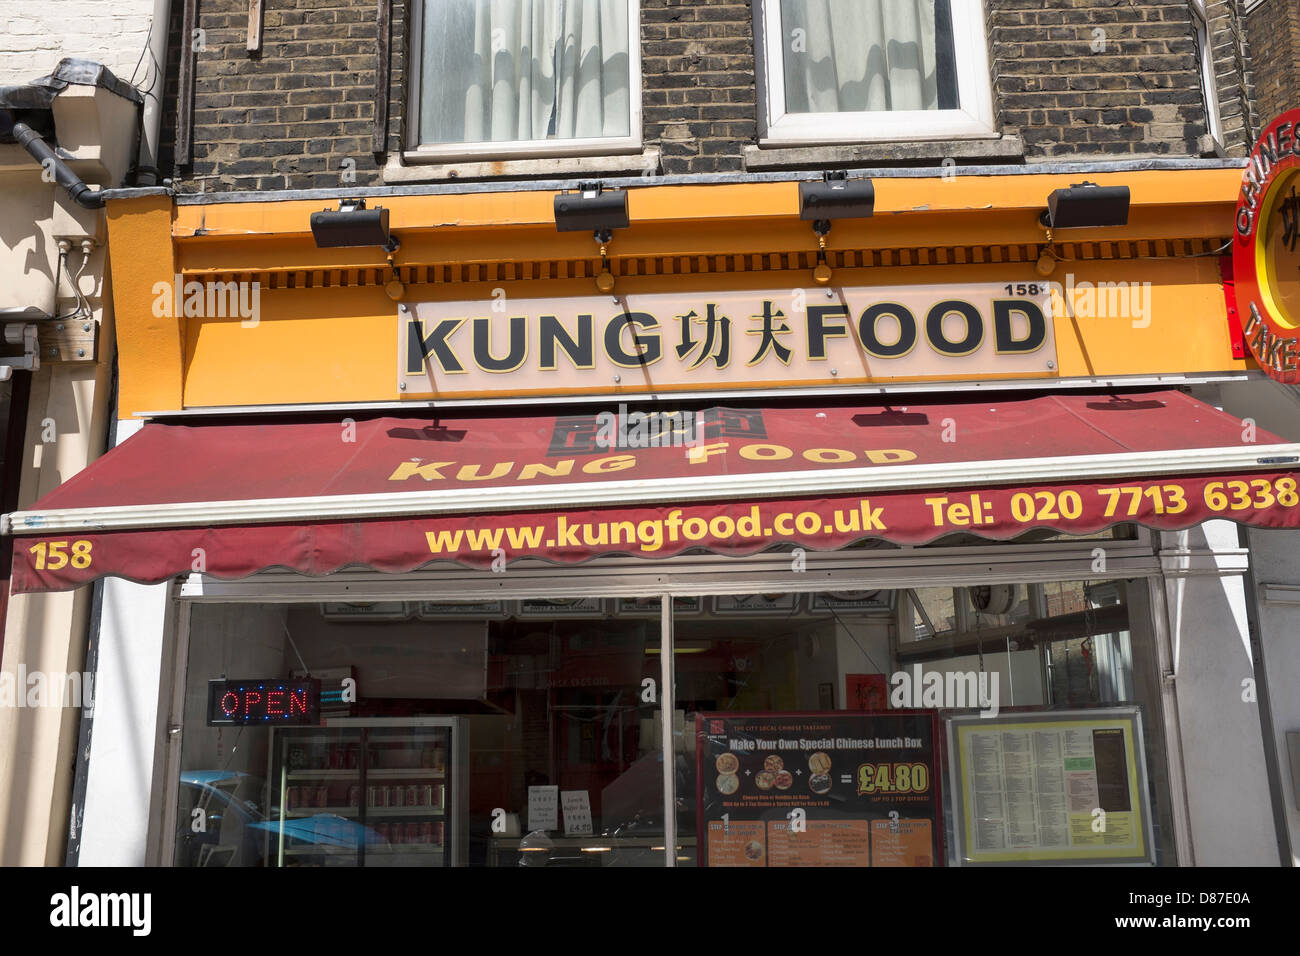 Kung Food Fast Food Restaurant Clerkenwell Road London Banque D'Images